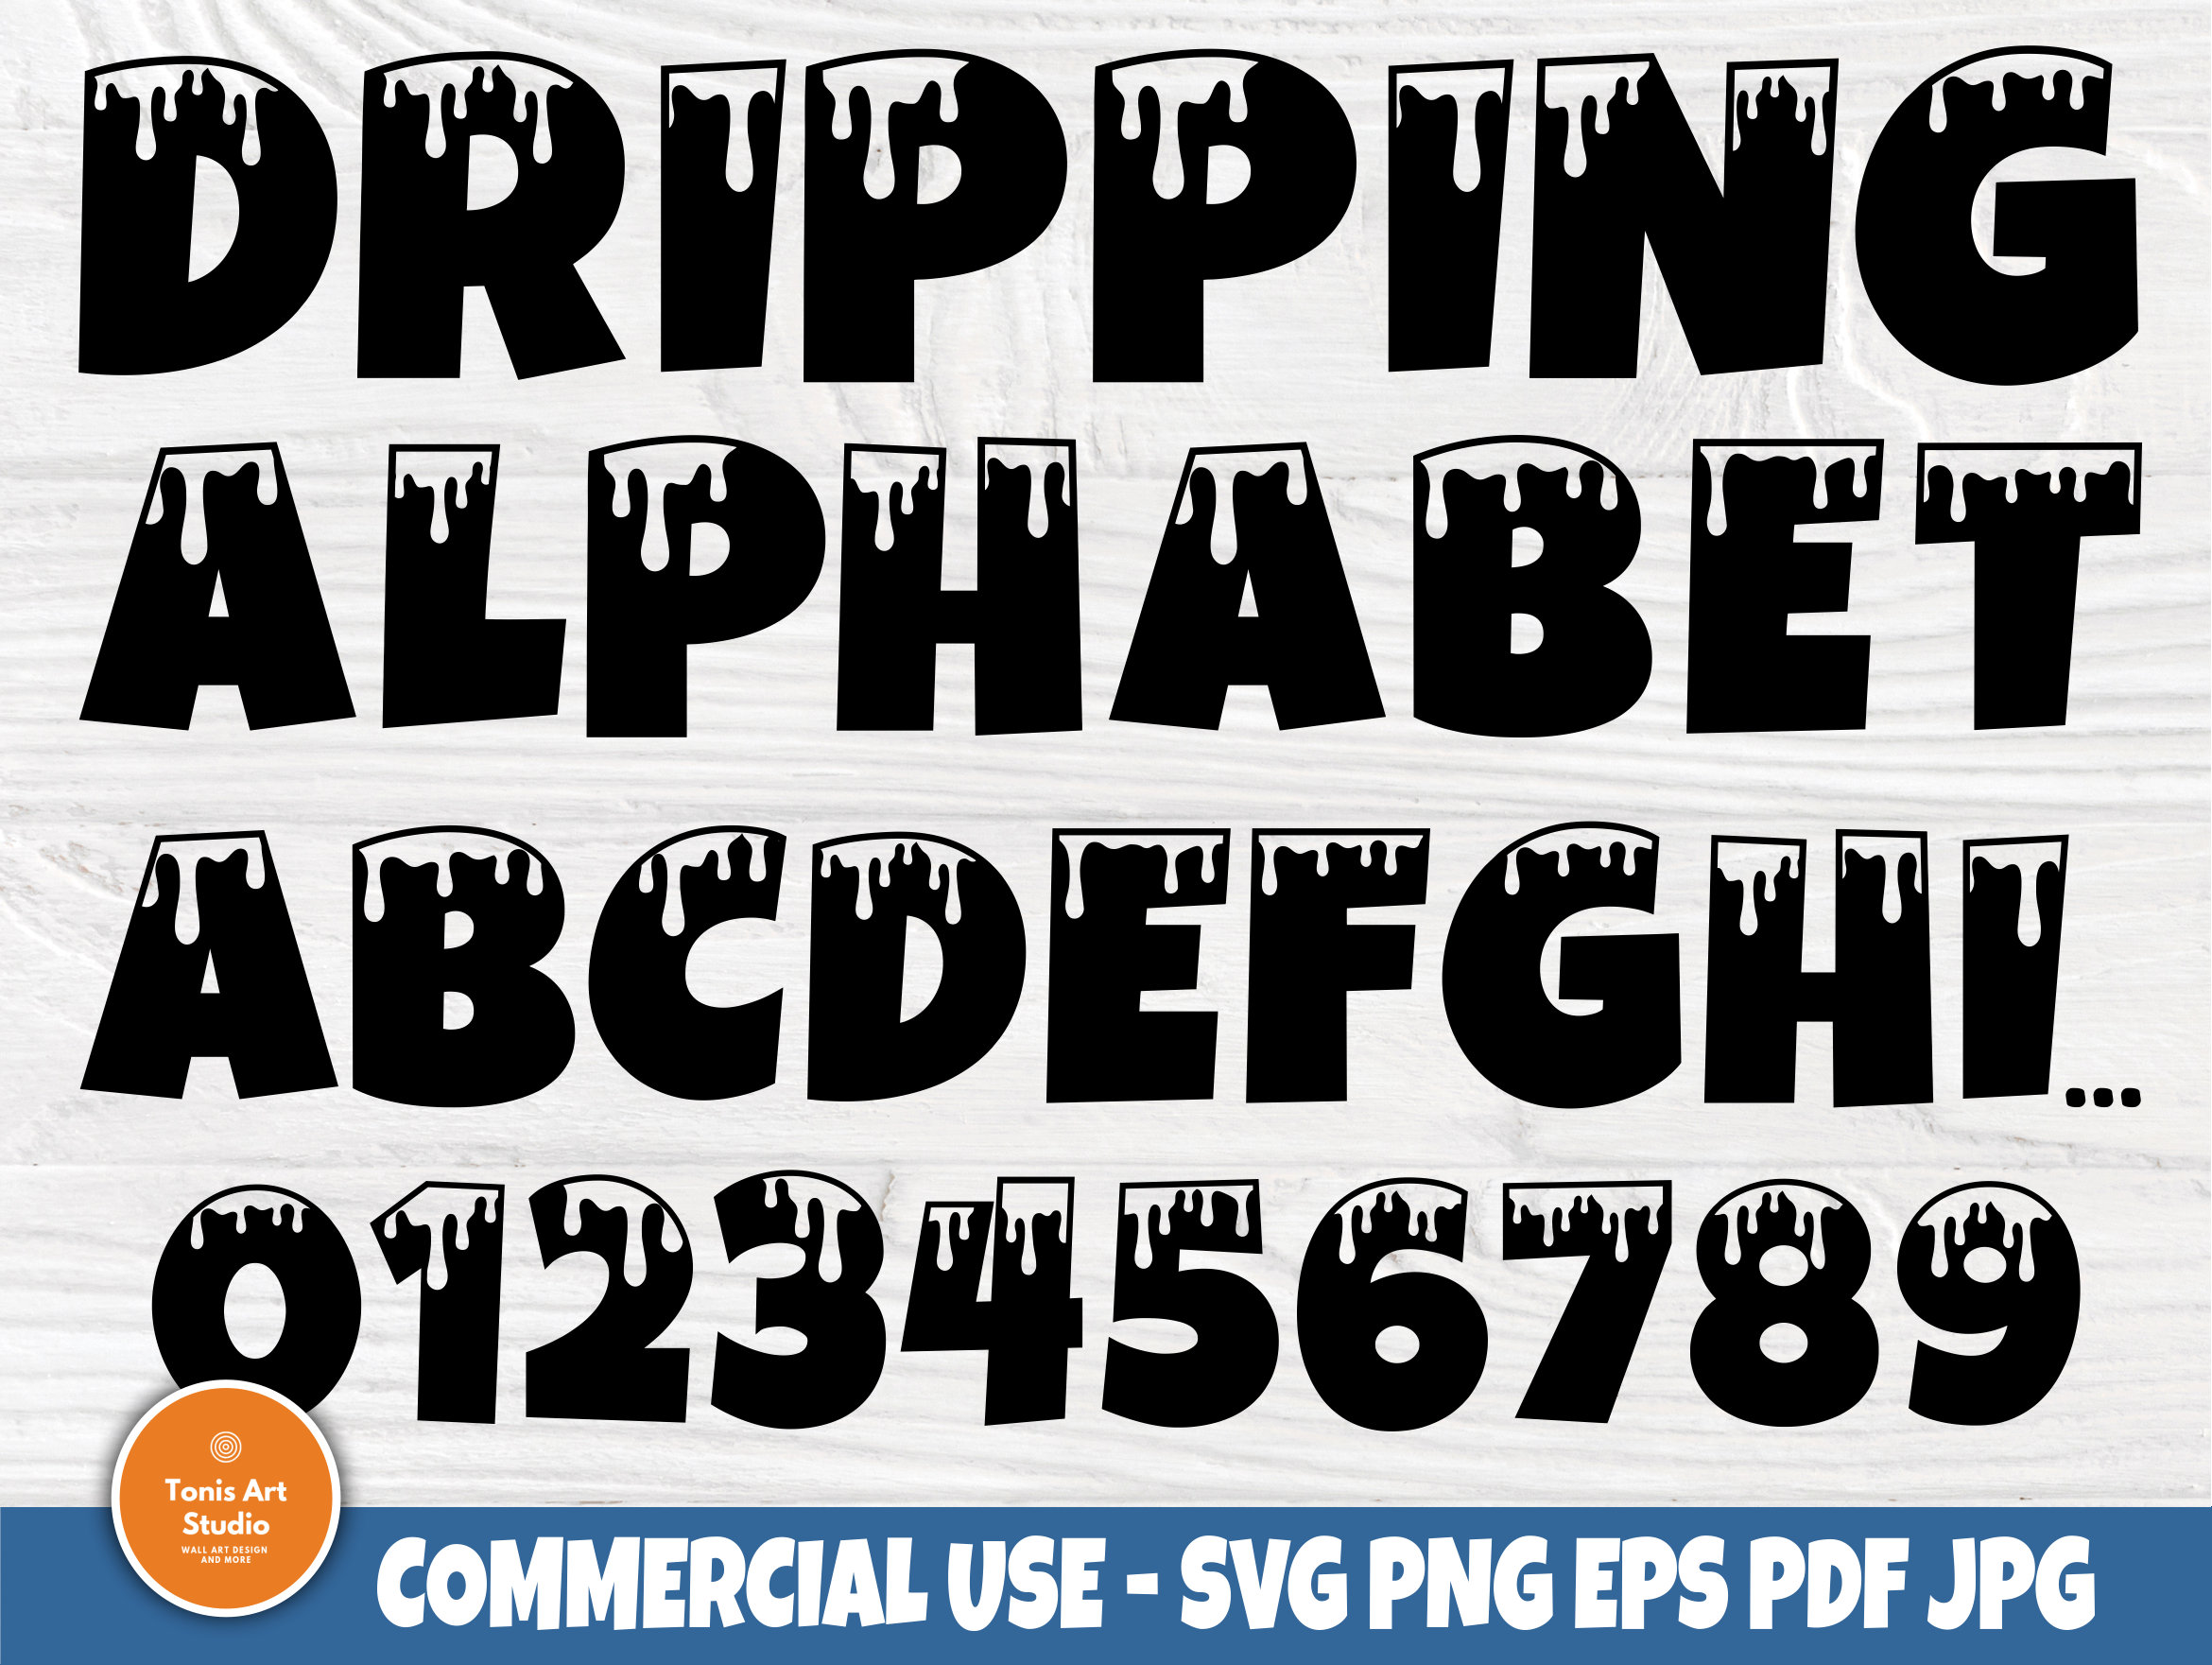 Download Dripping Font SVG | Dripping Alphabet | Dripping Cut Files ...